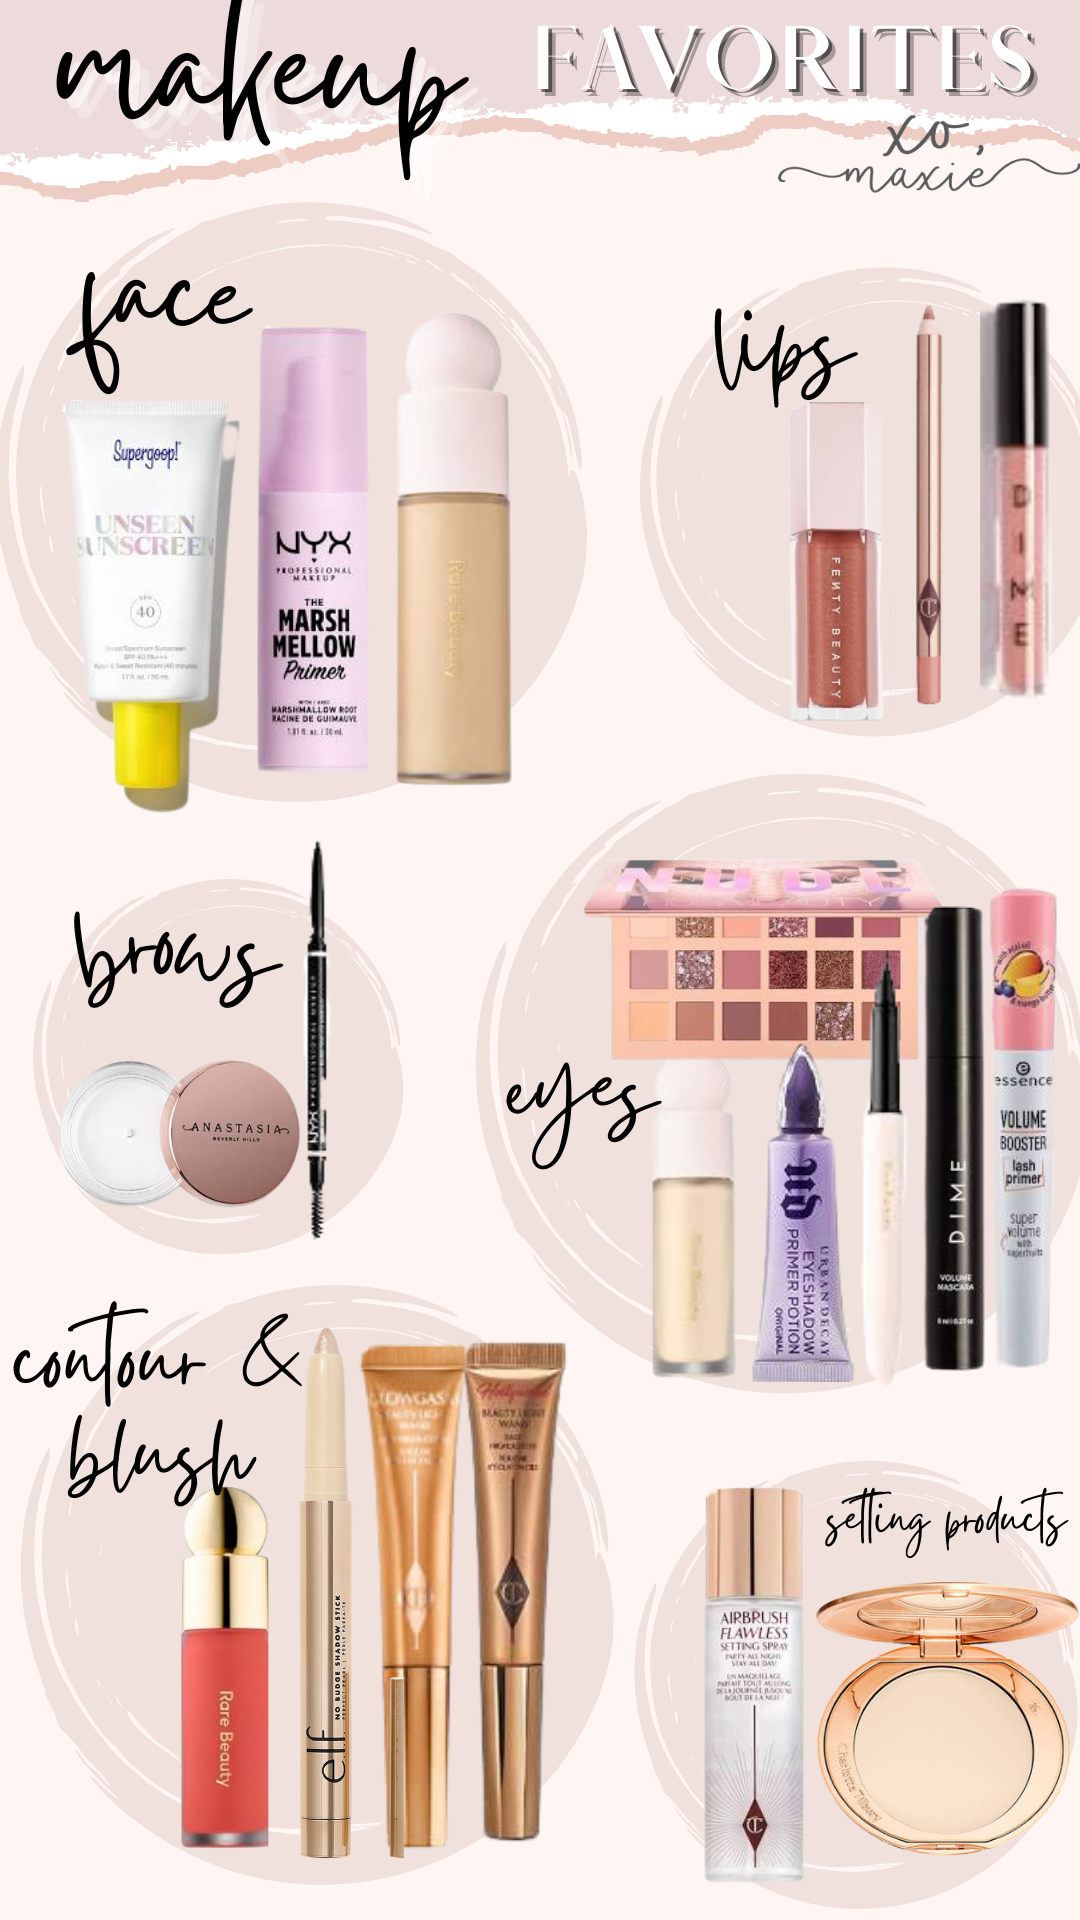 THE ONLY MAKEUP PRODUCTS YOU NEED!